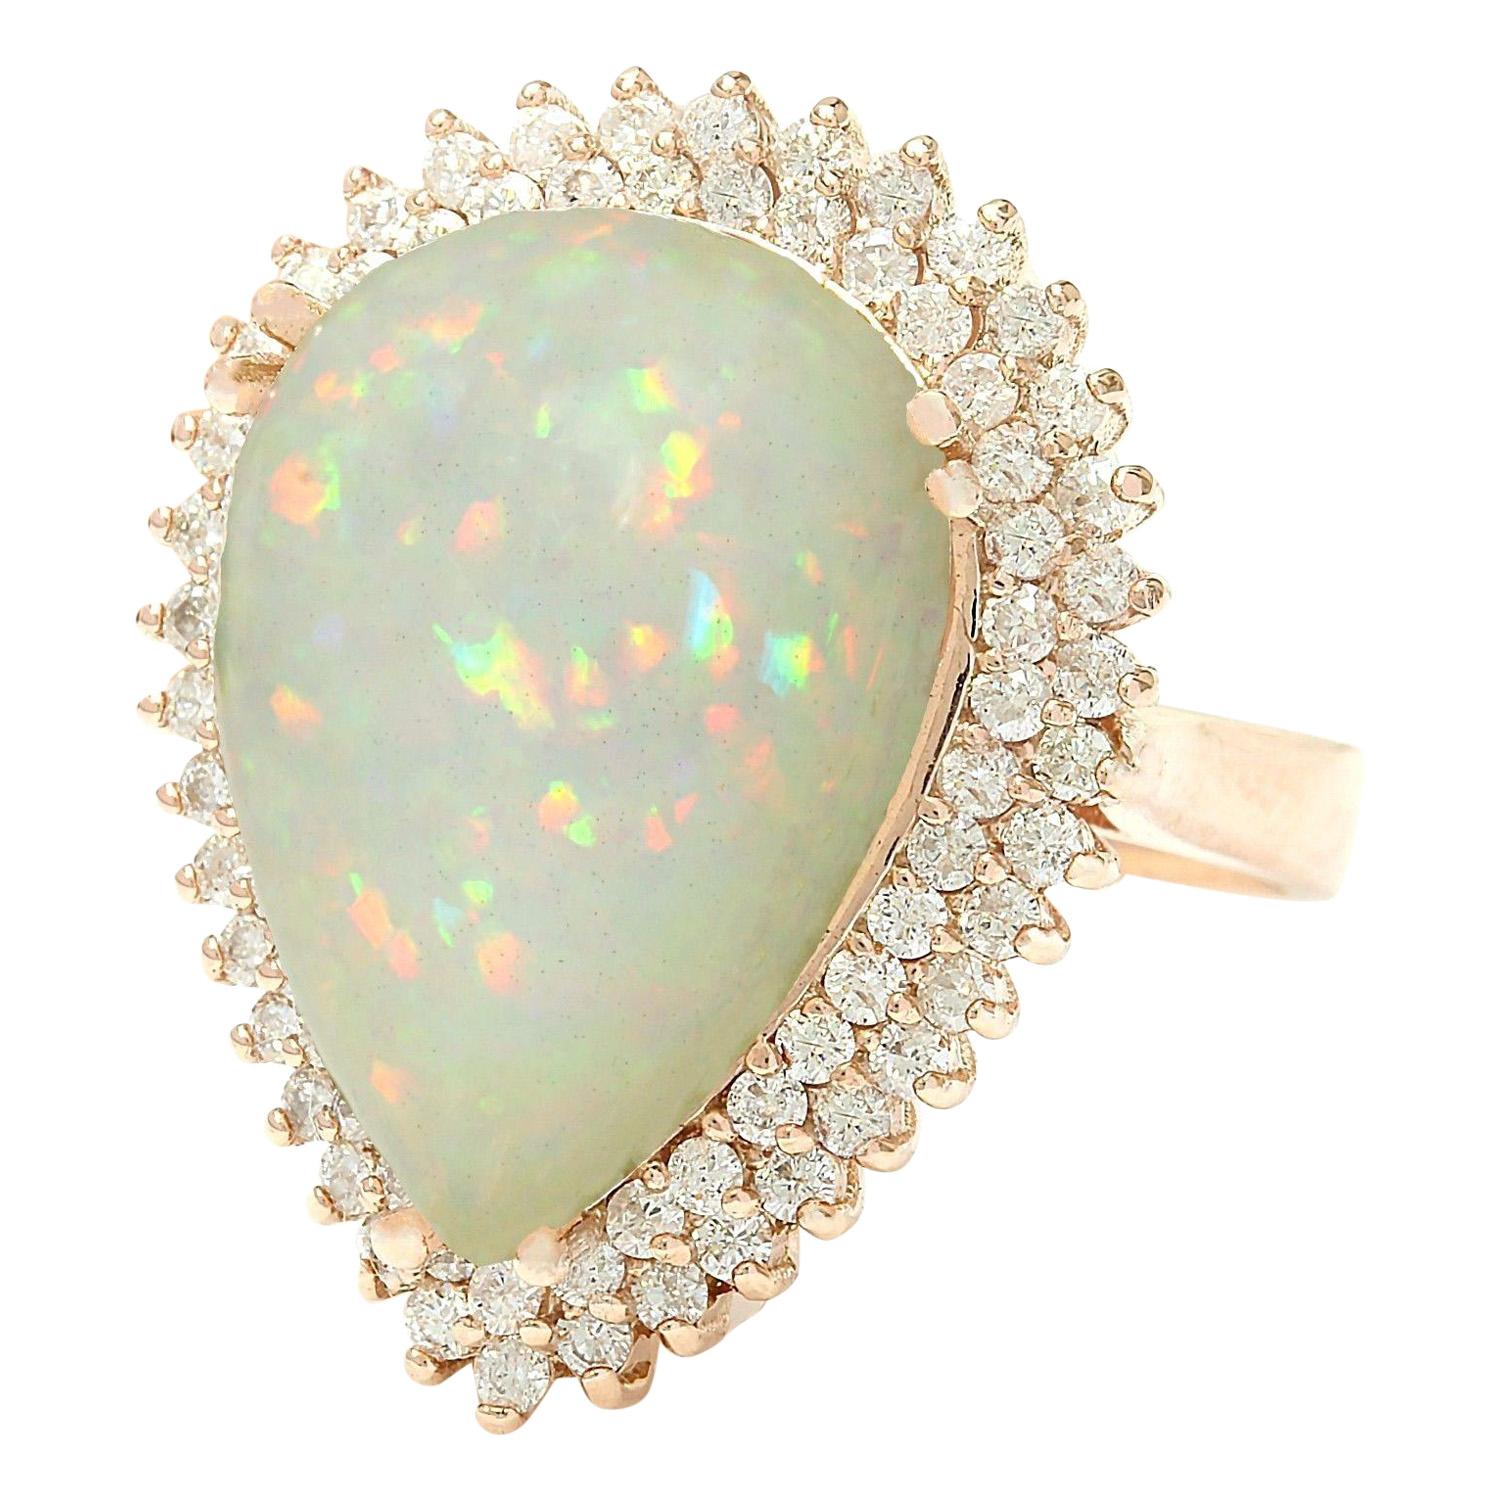 13.18 Carat Natural Opal 14K Solid Rose Gold Diamond Ring
 Item Type: Ring
 Item Style: Cocktail
 Material: 14K Rose Gold
 Mainstone: Opal
 Stone Color: Multicolor
 Stone Weight: 12.48 Carat
 Stone Shape: Pear
 Stone Quantity: 1
 Stone Dimensions: